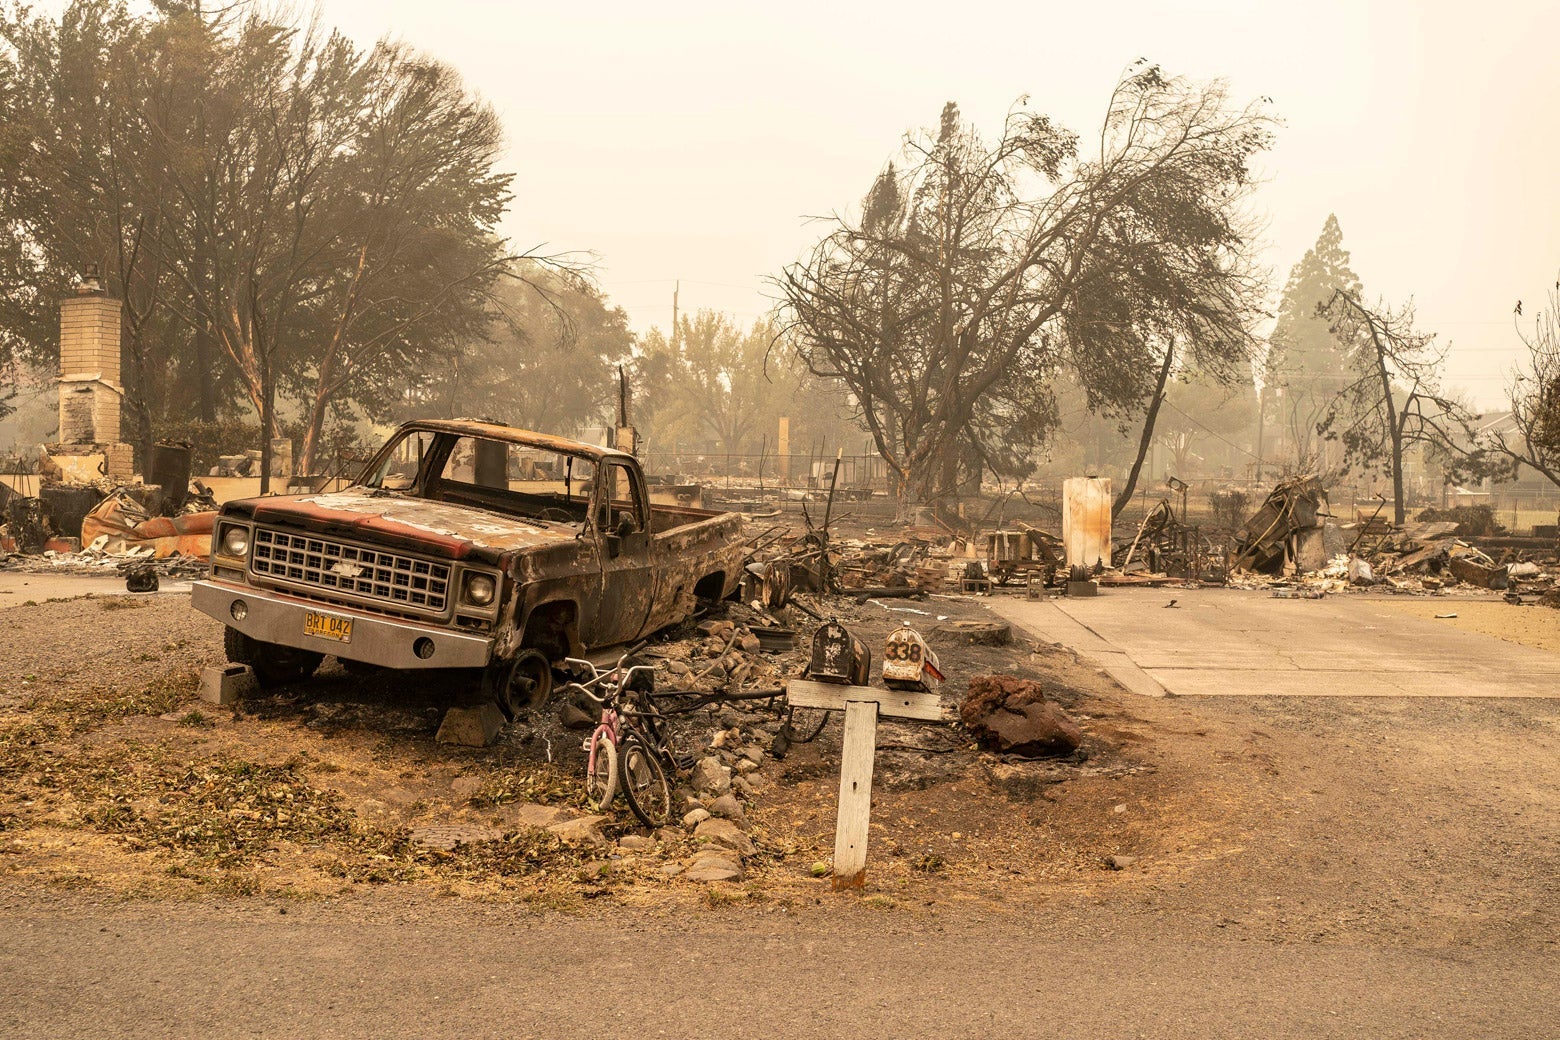 A burnt pickup truck sits in front of a scorched area.